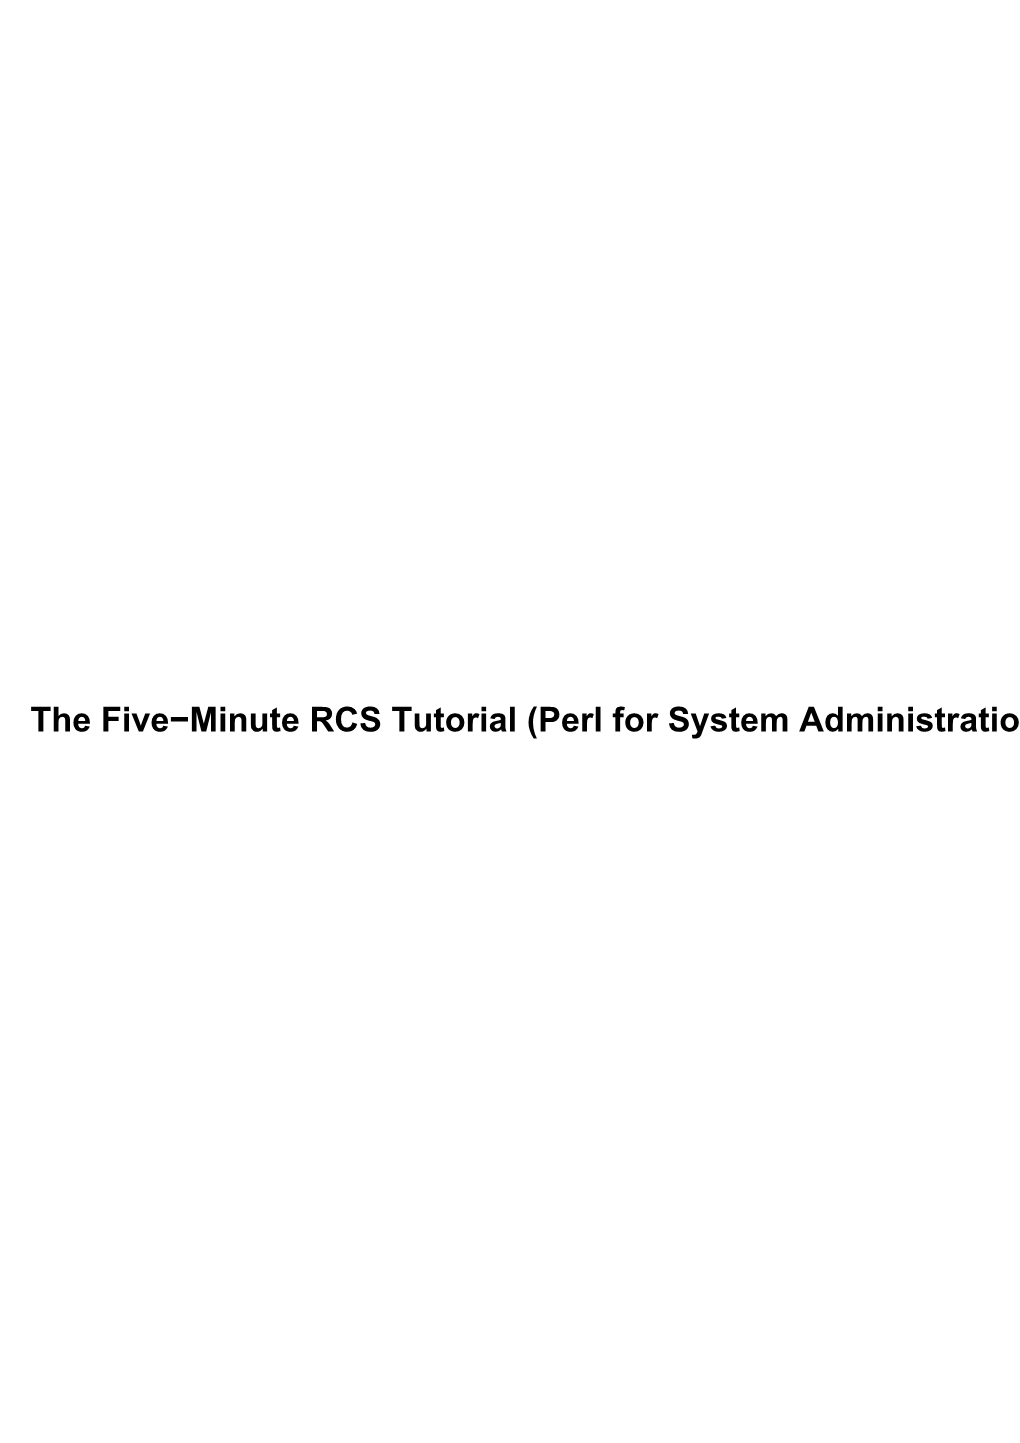 Perl for System Administration) the Five−Minute RCS Tutorial (Perl for System Administration)